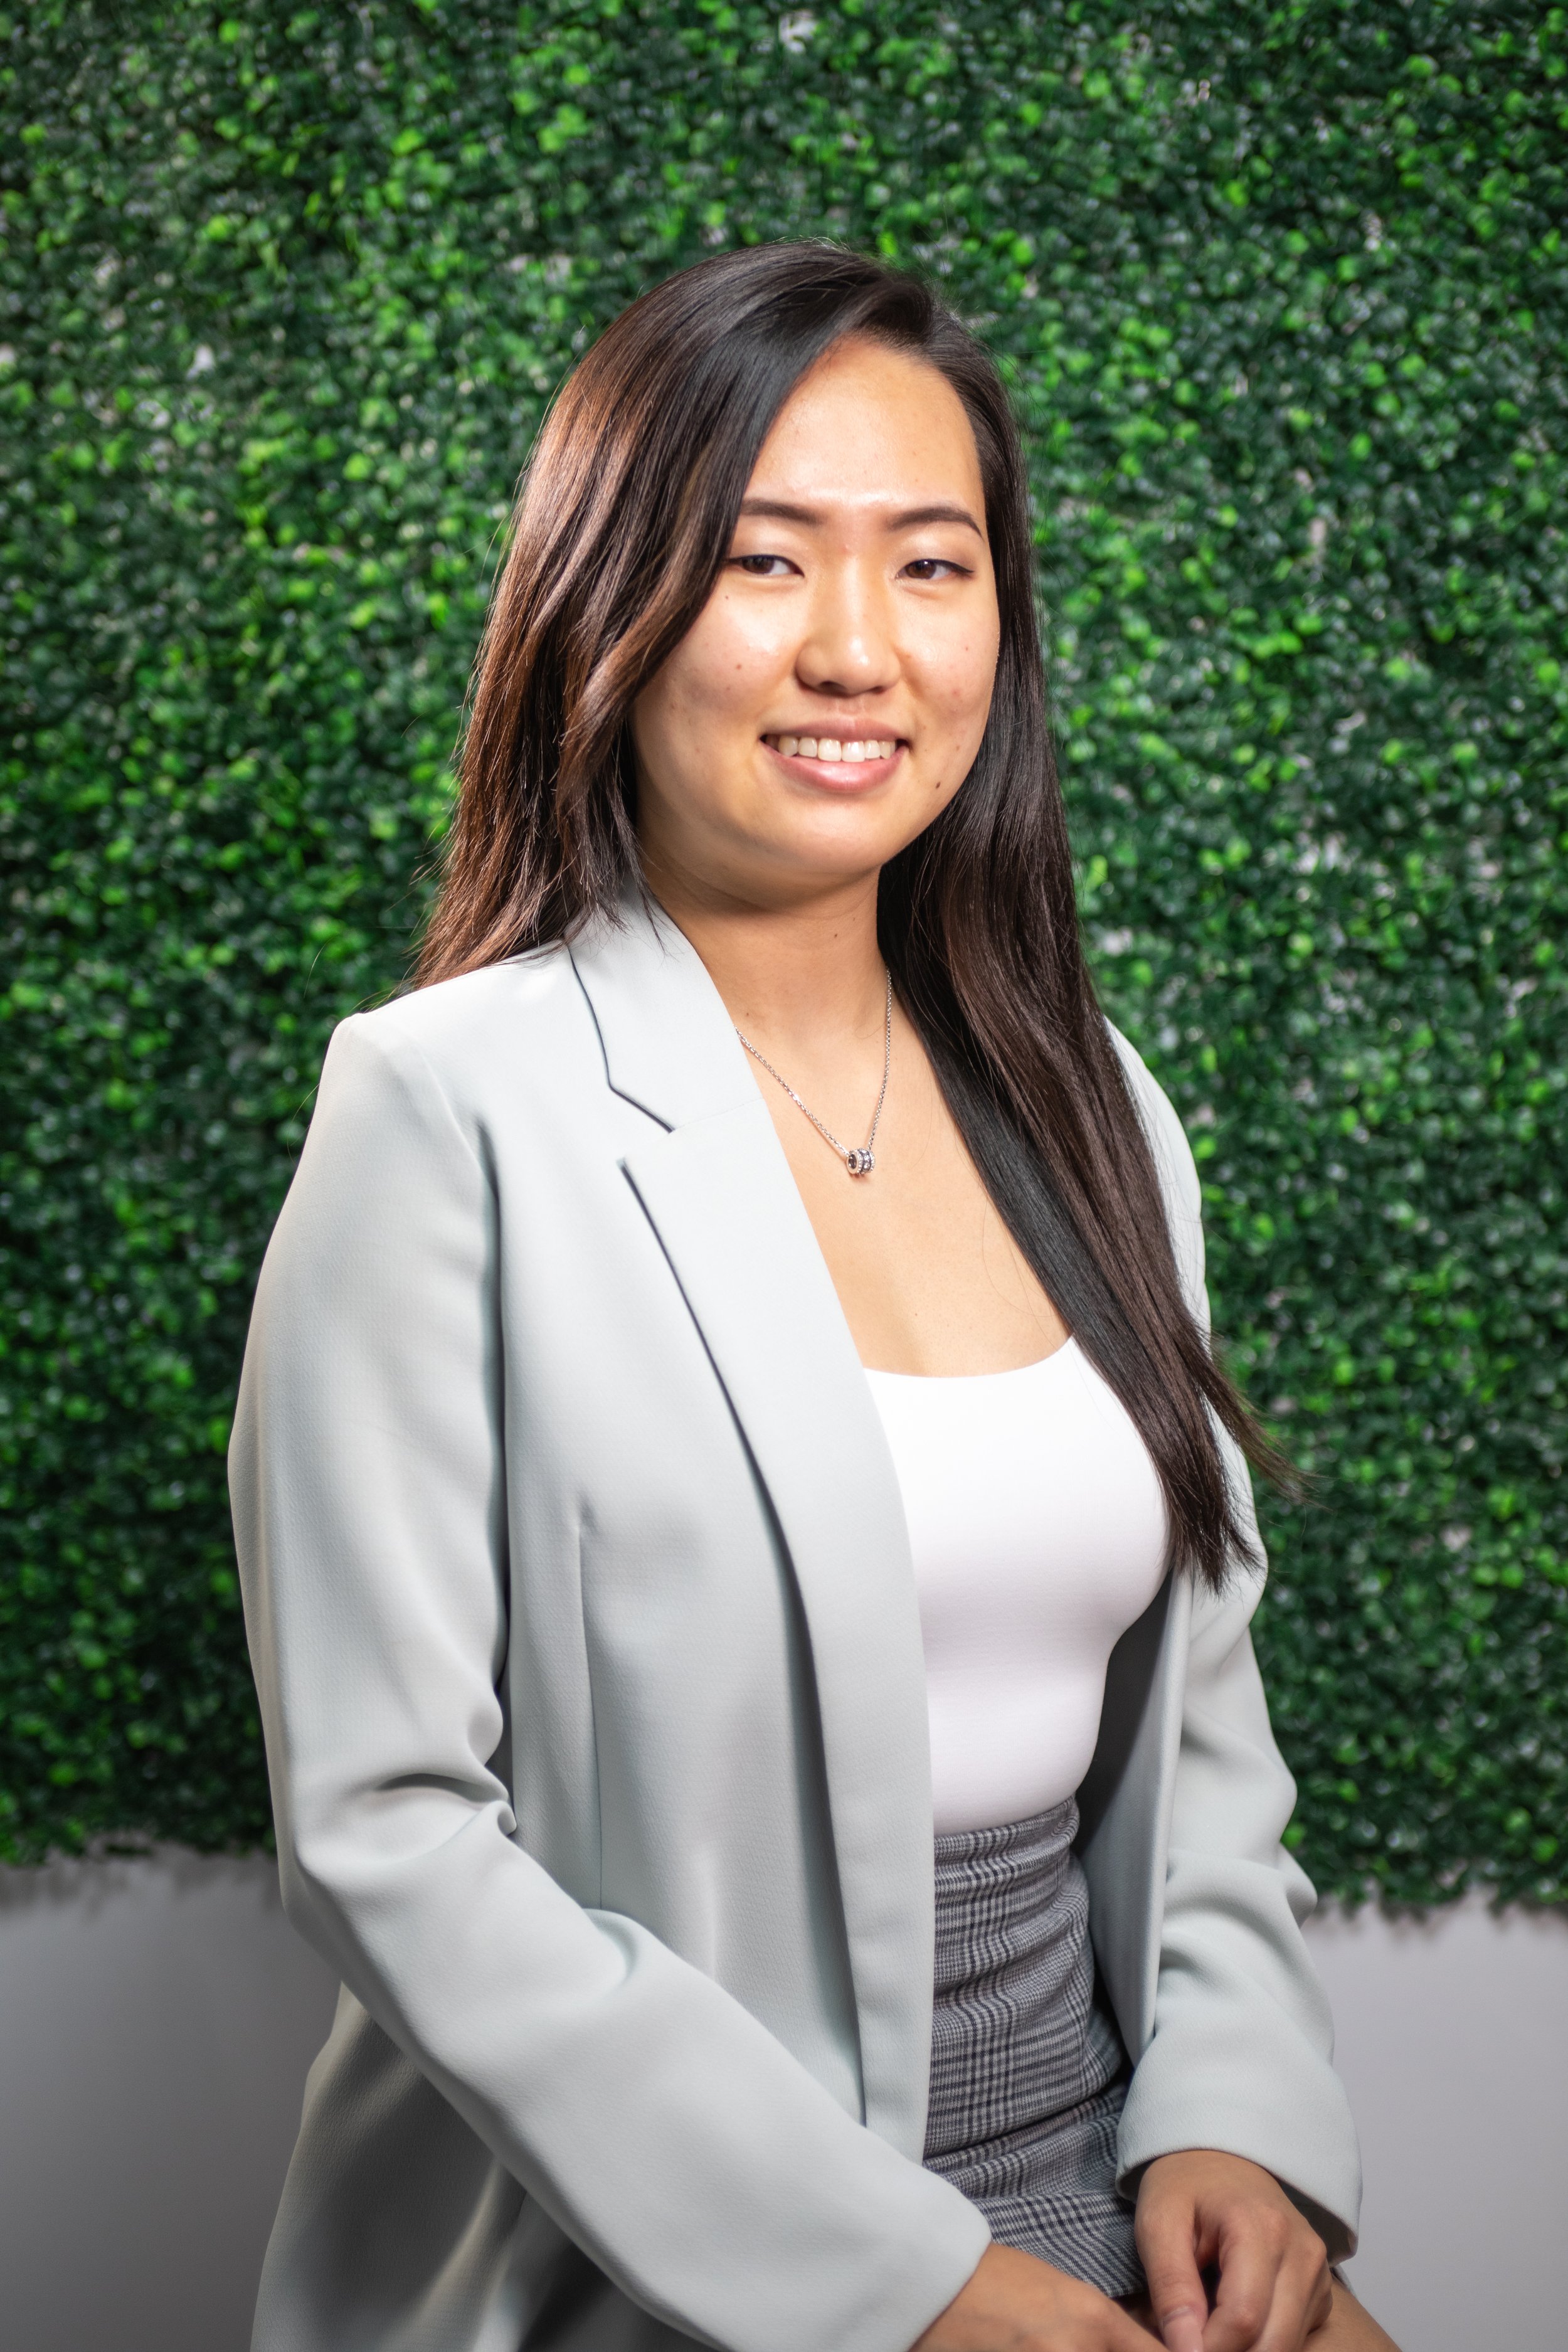 MICHELLE CHUNG - DIRECTOR OF FRANCHISING